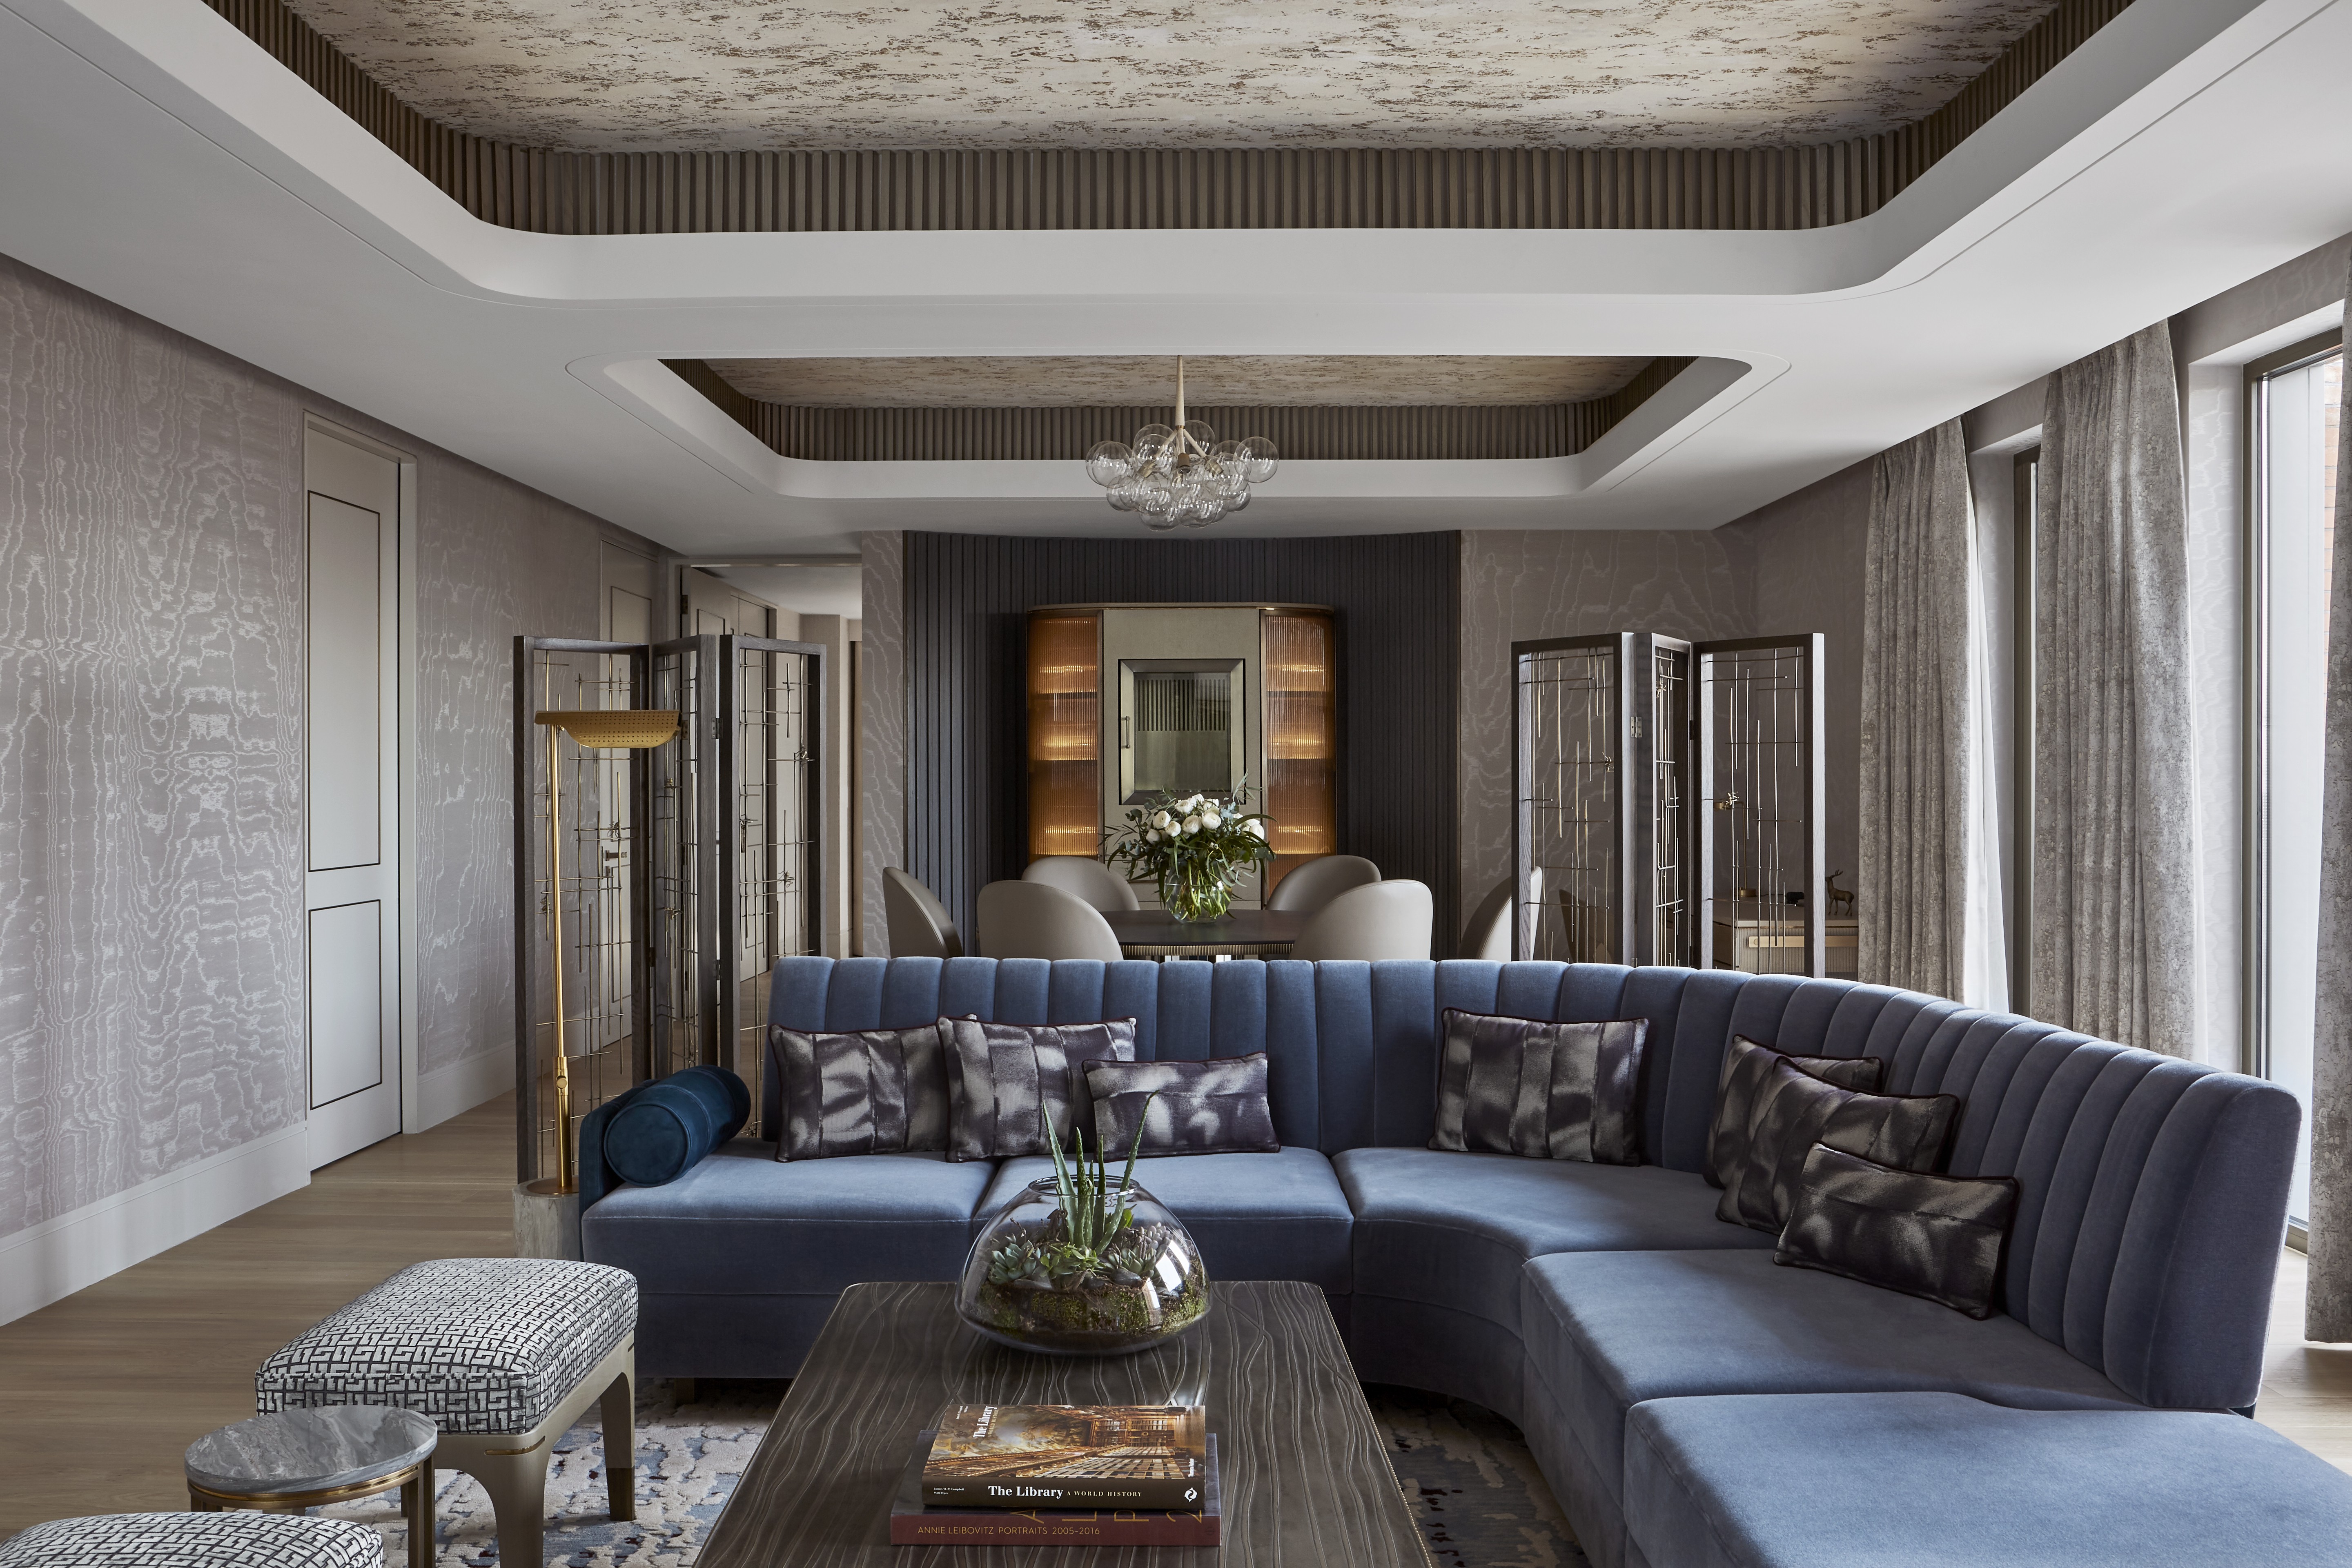 Penthouse Suite at the Mandarin Oriental Hyde Park, London designed by Hong Kong-based interior designer Joyce Wang. The different textures, forms and colours have been inspired by what can be found at ground level of the legendary location, including fallen acorns.